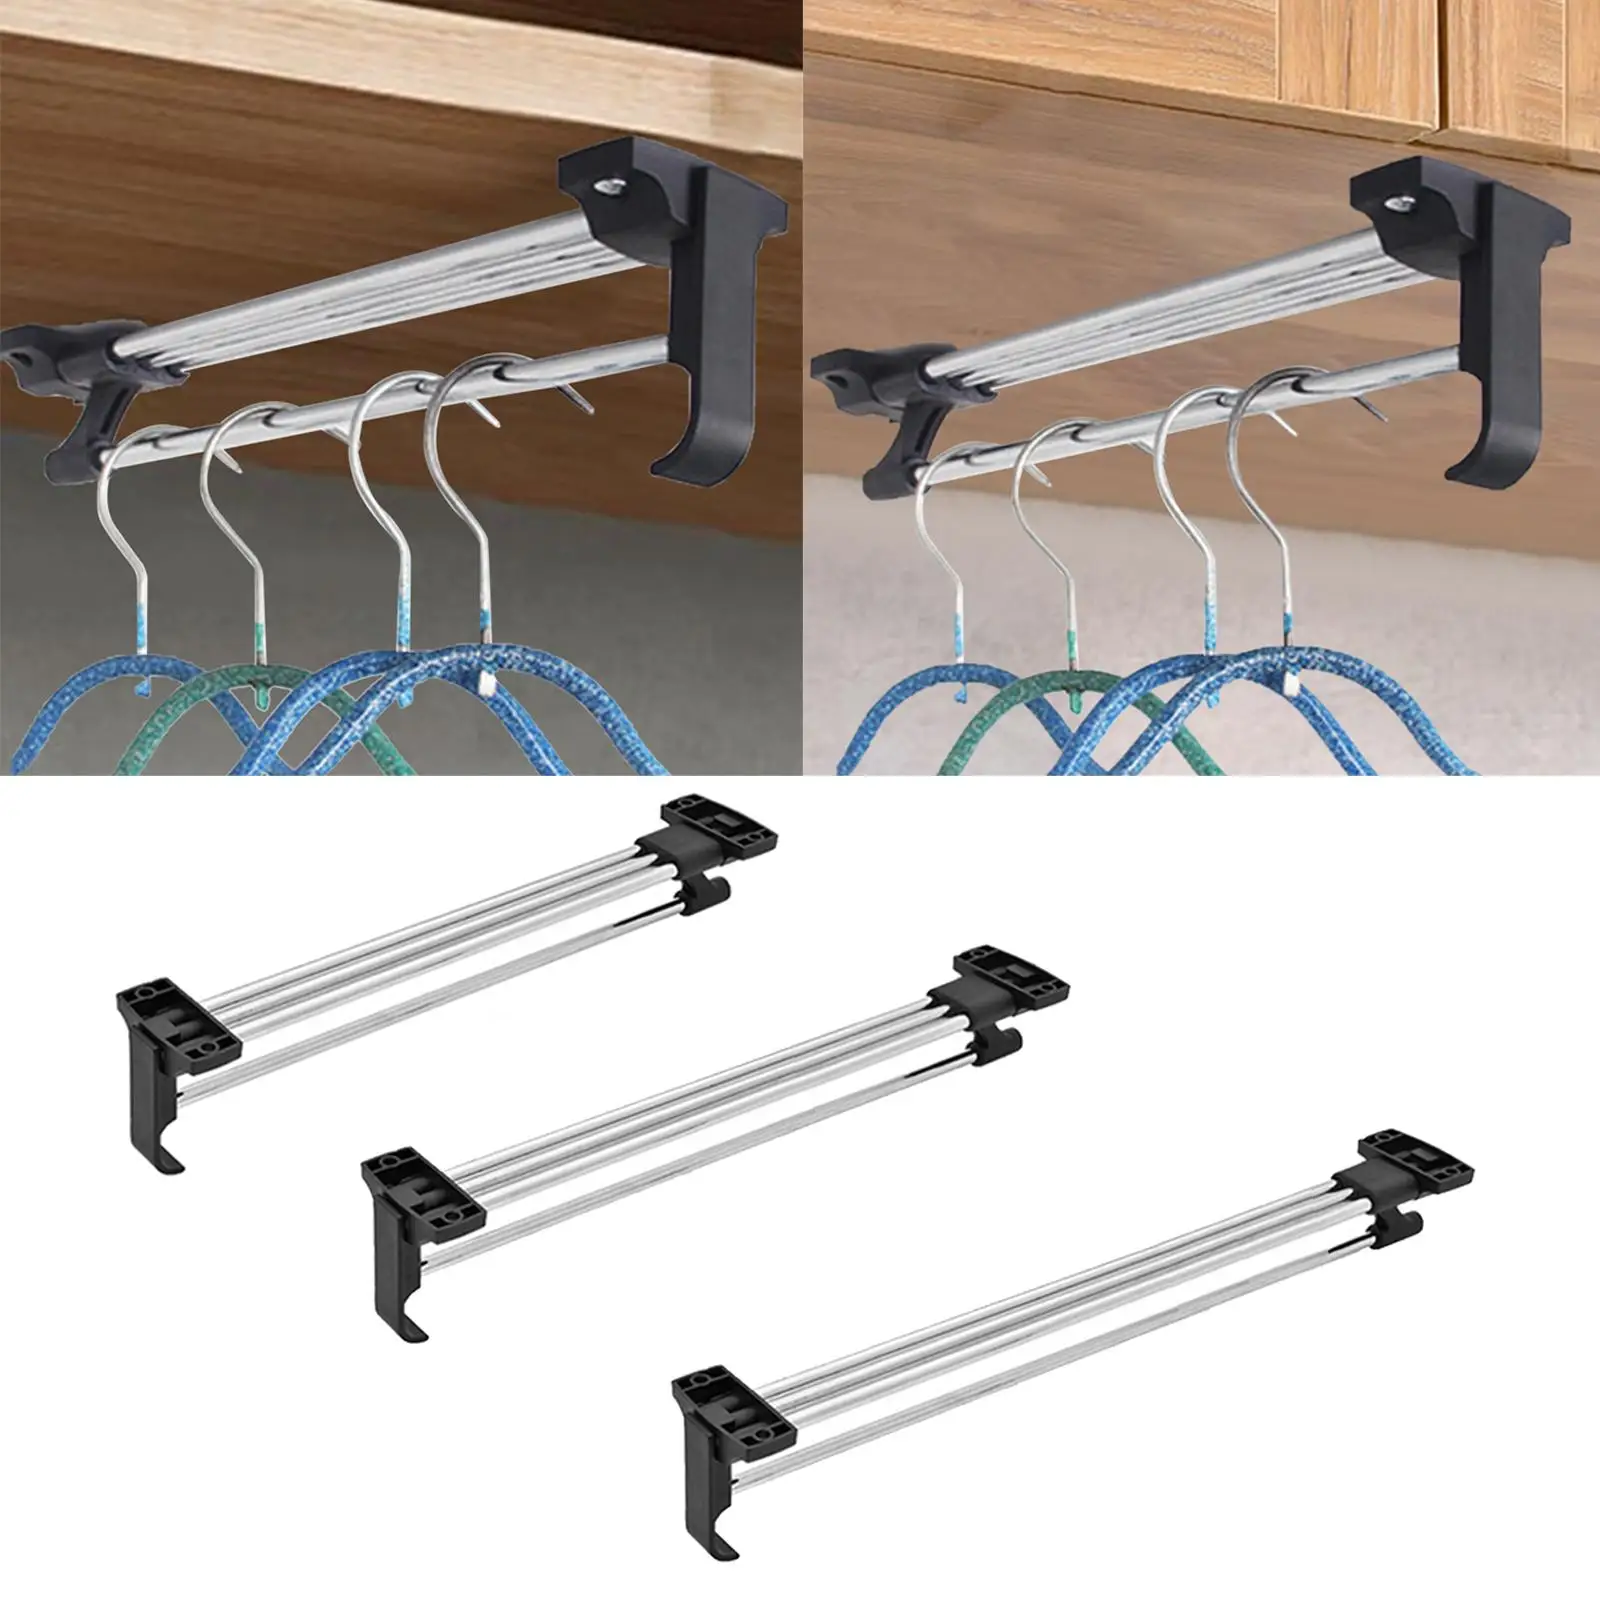 Clothing Hanger Telescopic Rod Clothes Hanger Clothes Drying Rack Closet Rod for Laundry Room Closet Home Bathroom Wardrobe